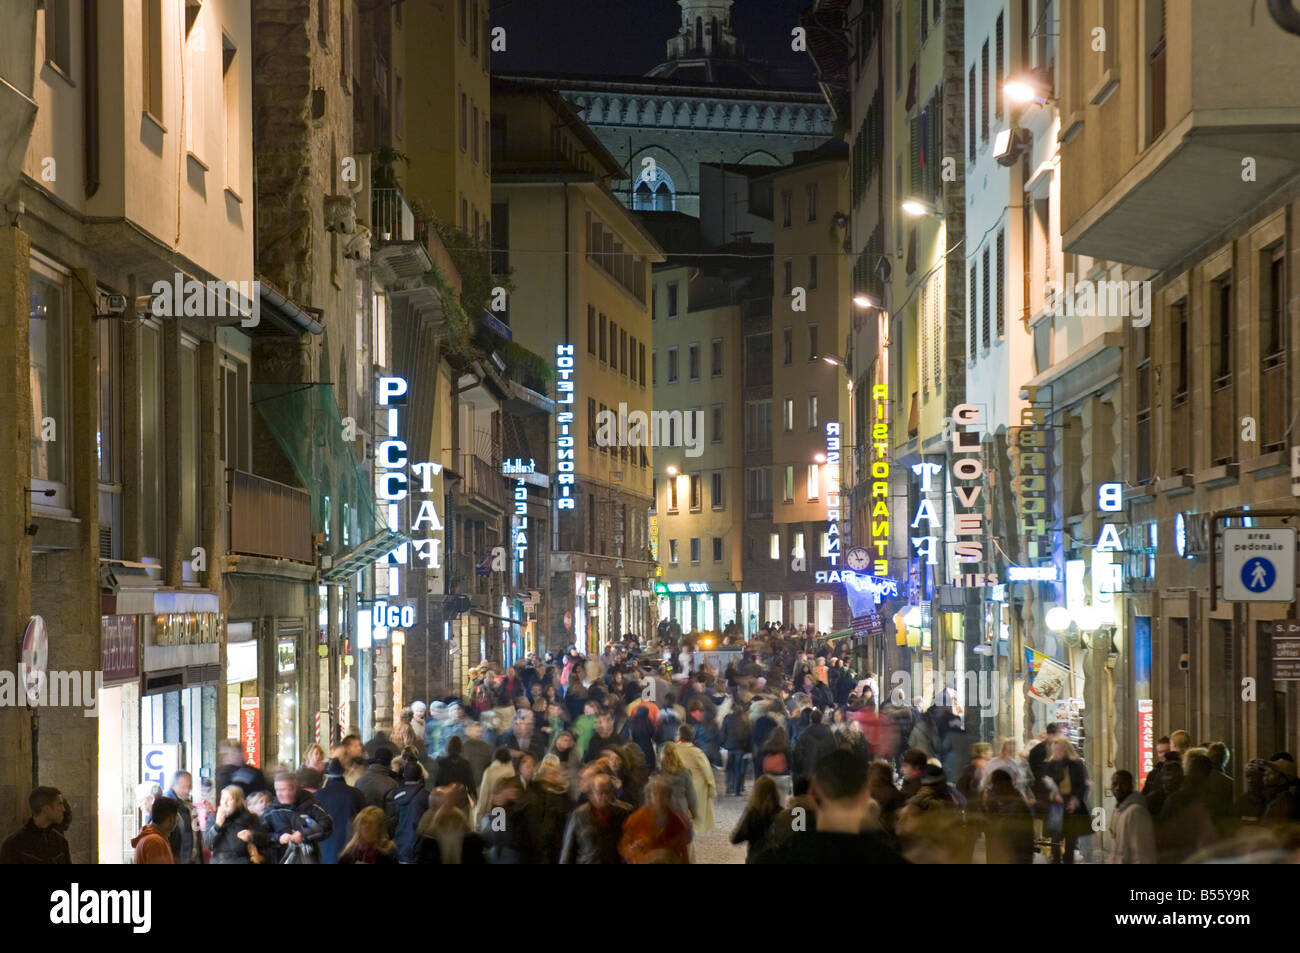 A view of shoppers and people walking along Via Por Santa Maria - compressed perspective and slow shutter speed for motion blur. Stock Photo